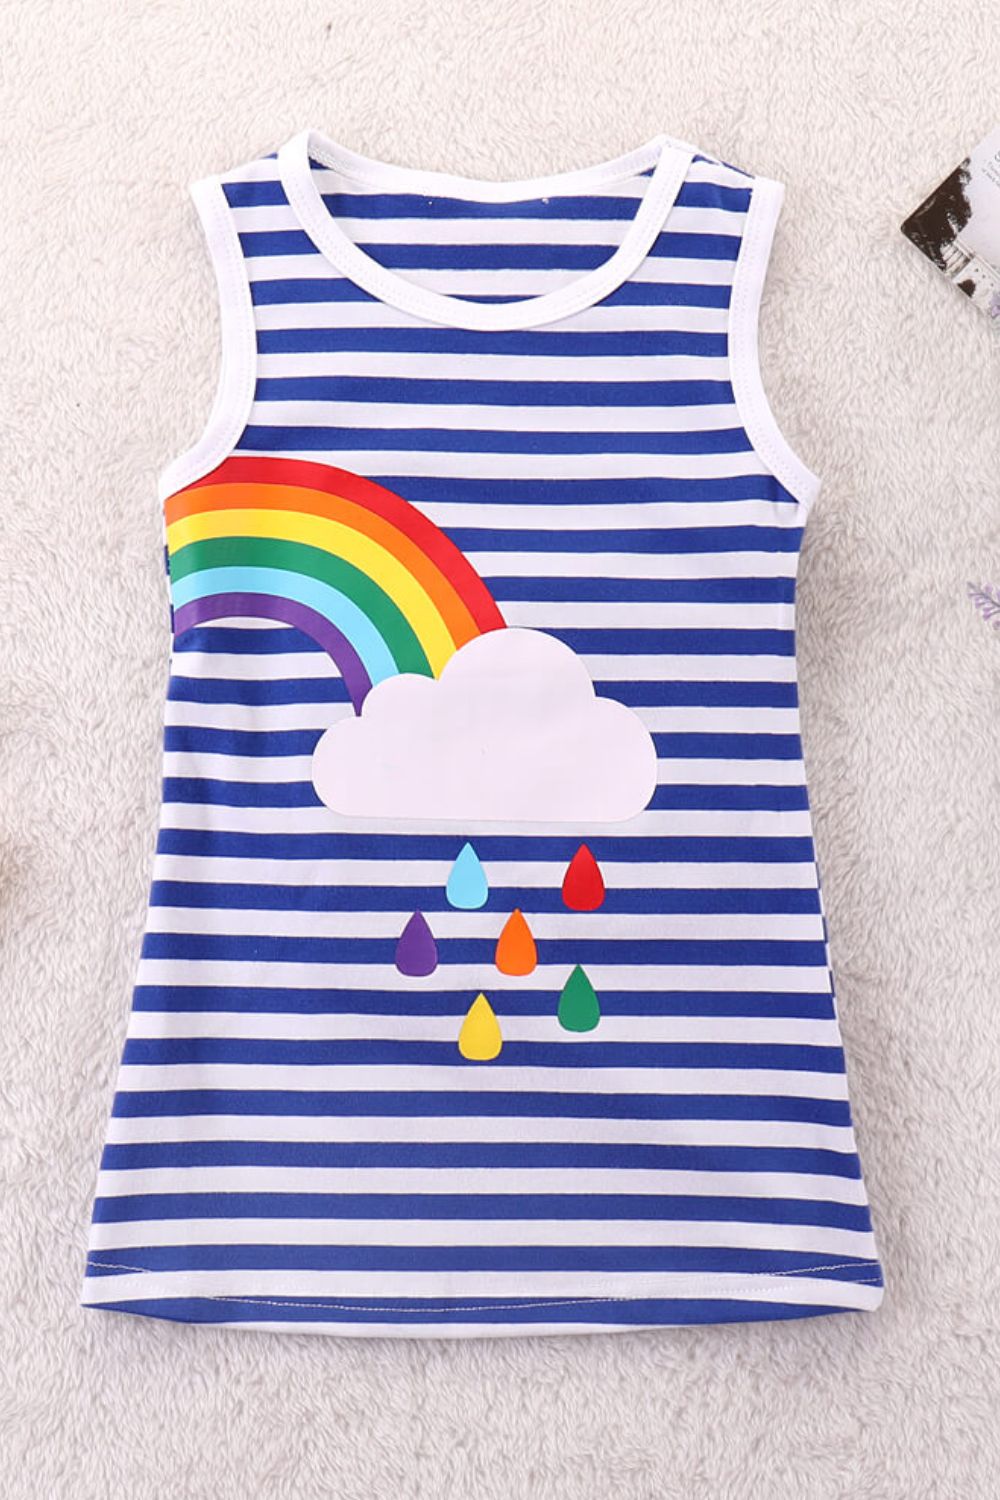 RAINBOW ON THE LEFT - Girls Rainbow Graphic Striped Sleeveless Dress - toddlers top at TFC&H Co.